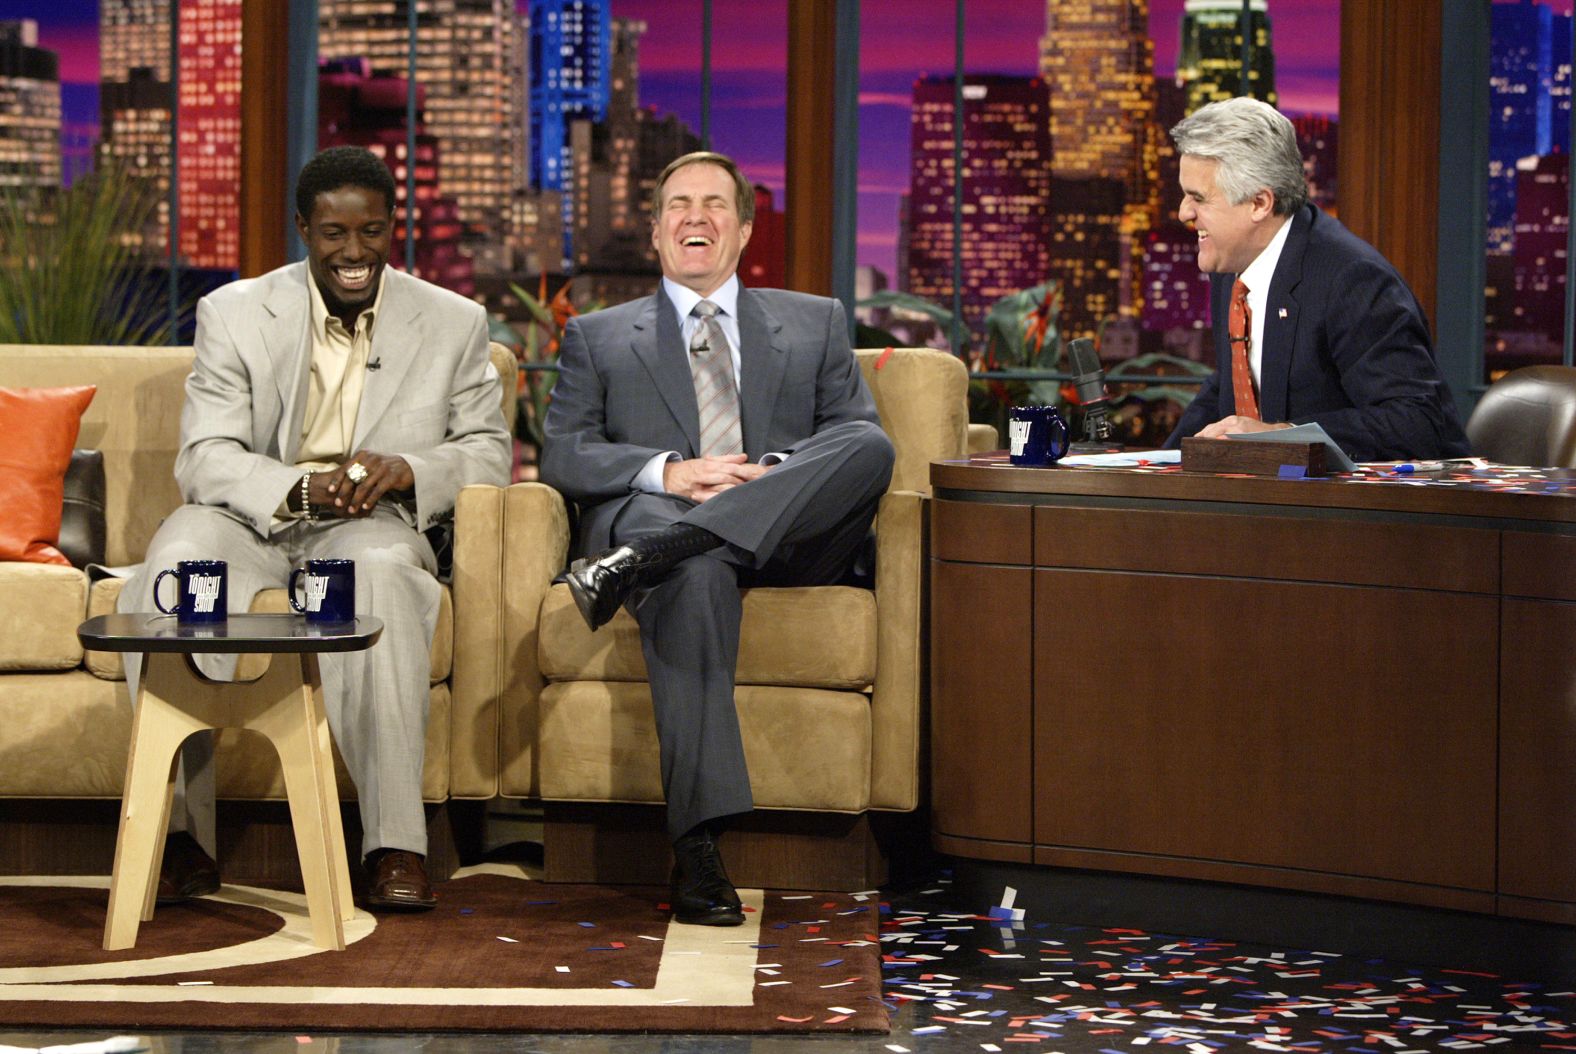 Belichick and Super Bowl MVP Deion Branch chat with late-night TV host Jay Leno in 2005.